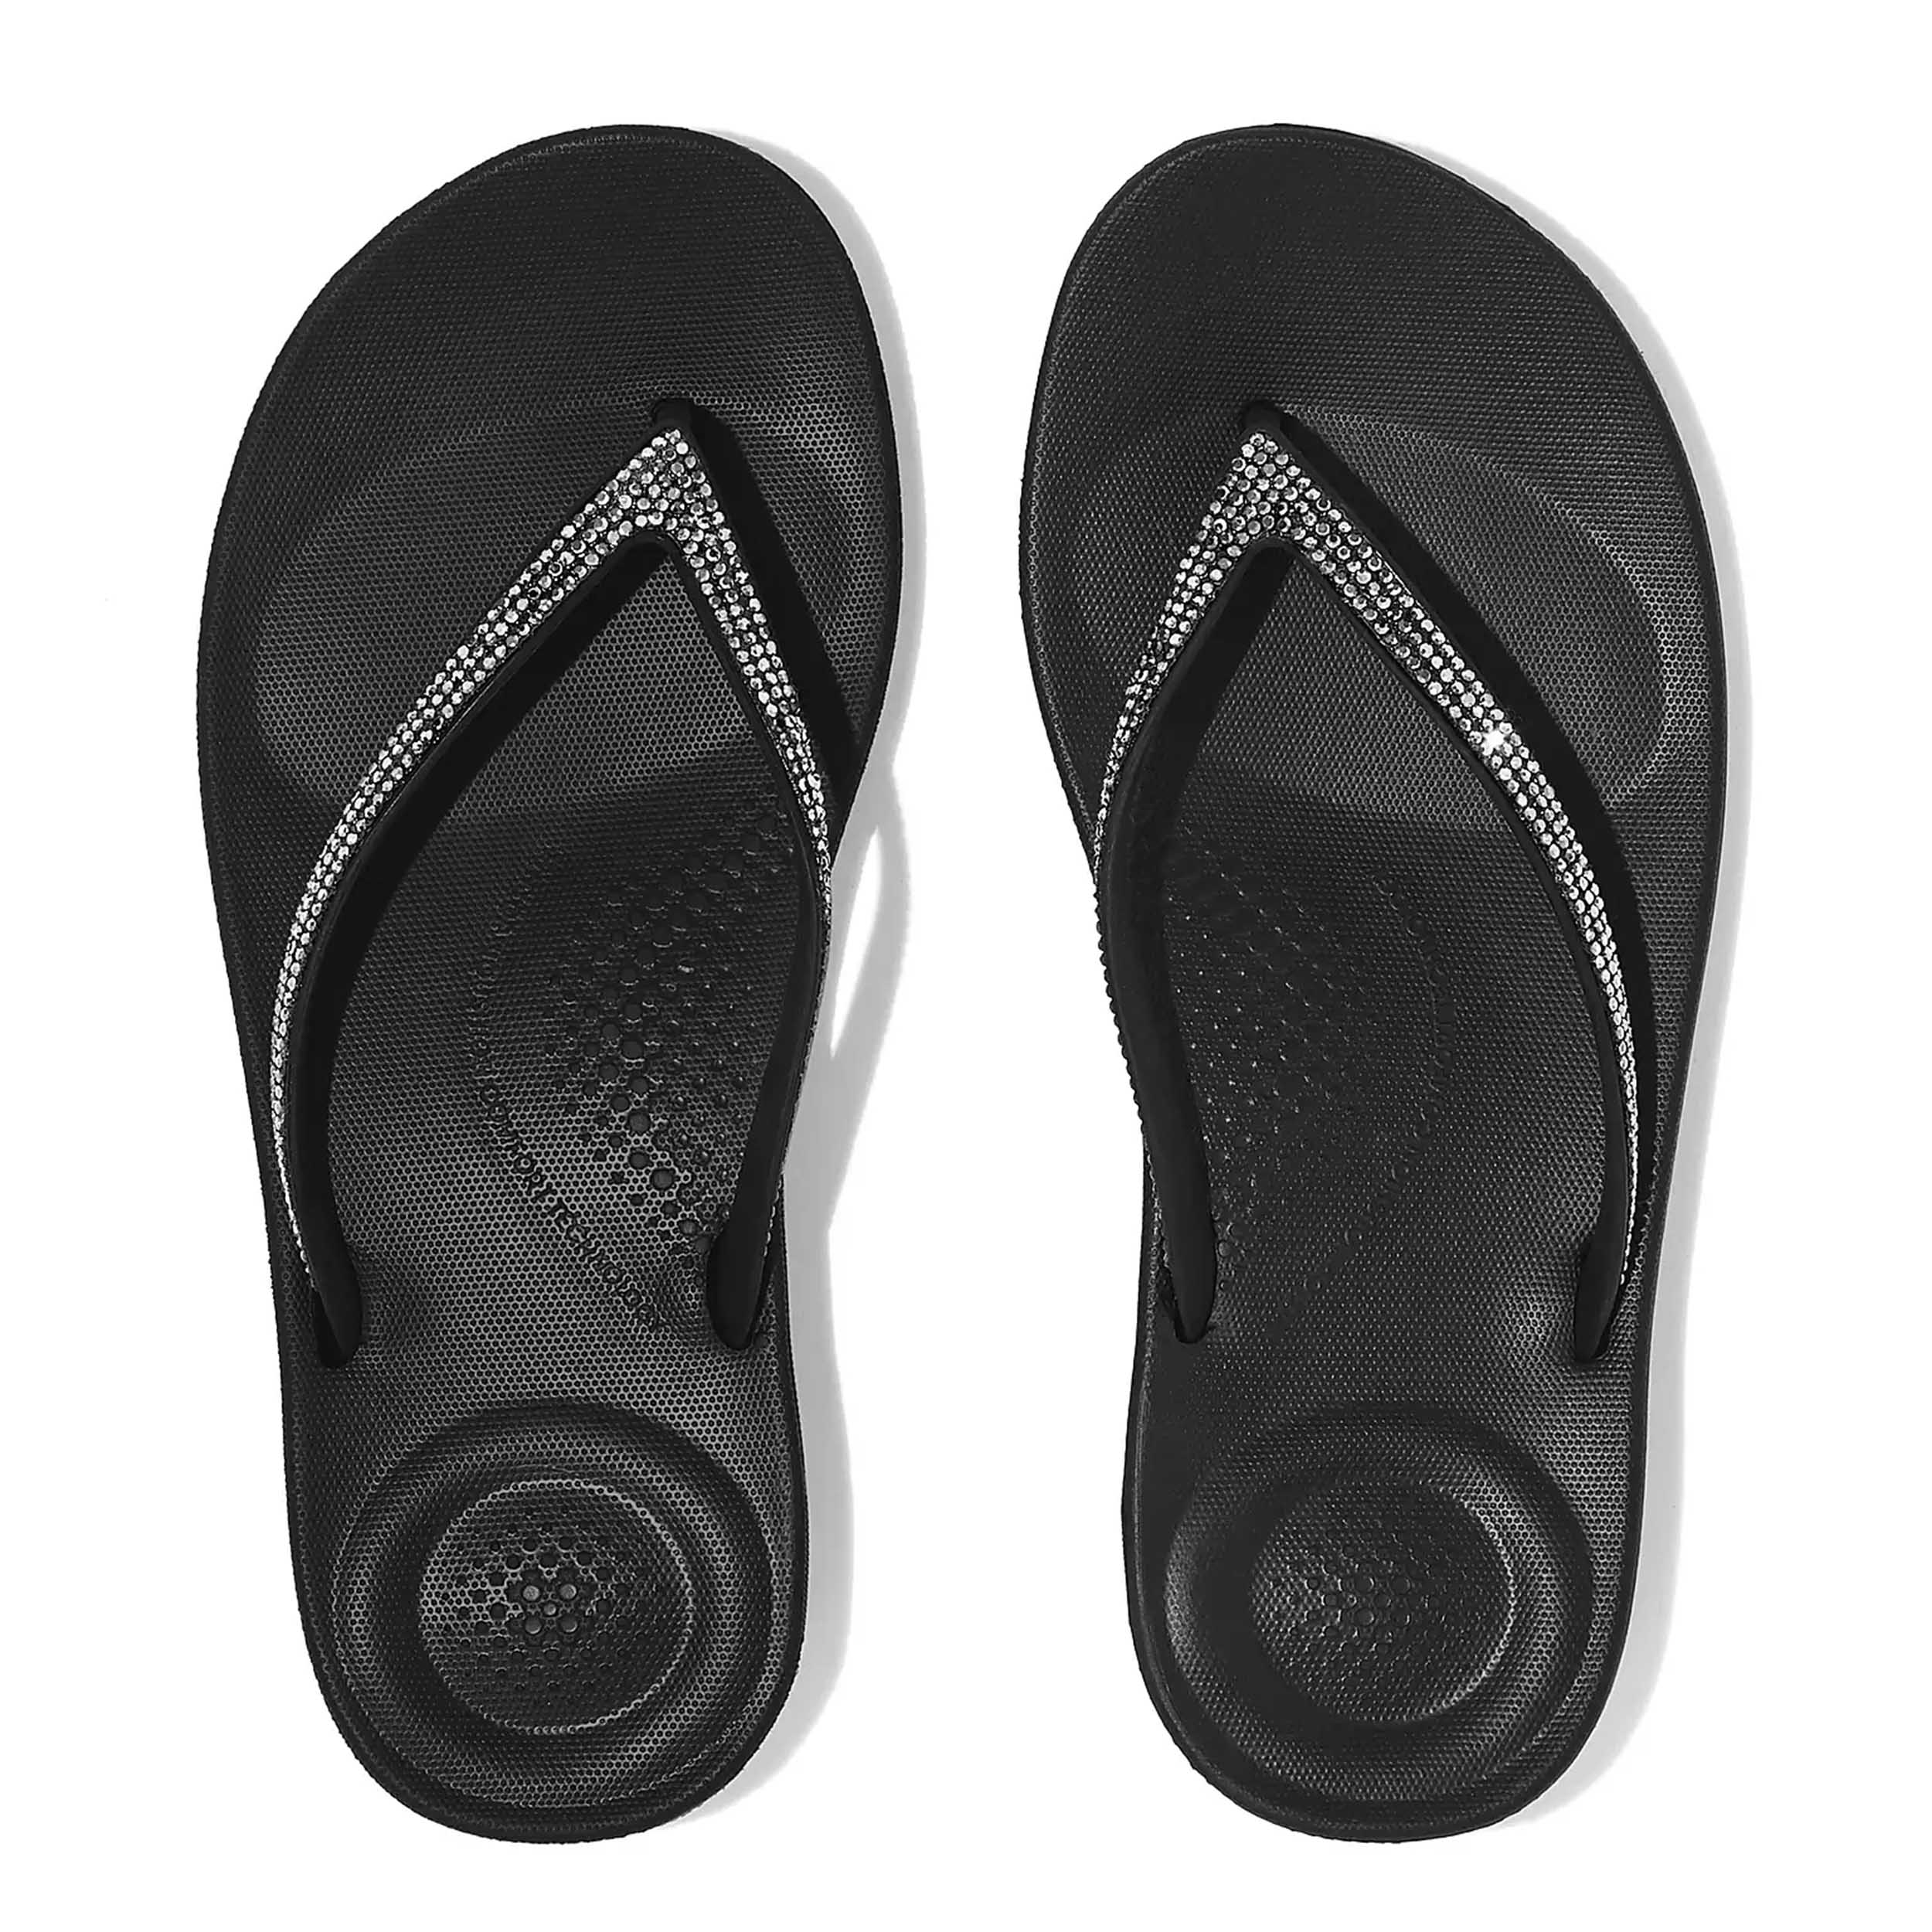 FitFlop R08 Slipper iQushion Sparkle Black